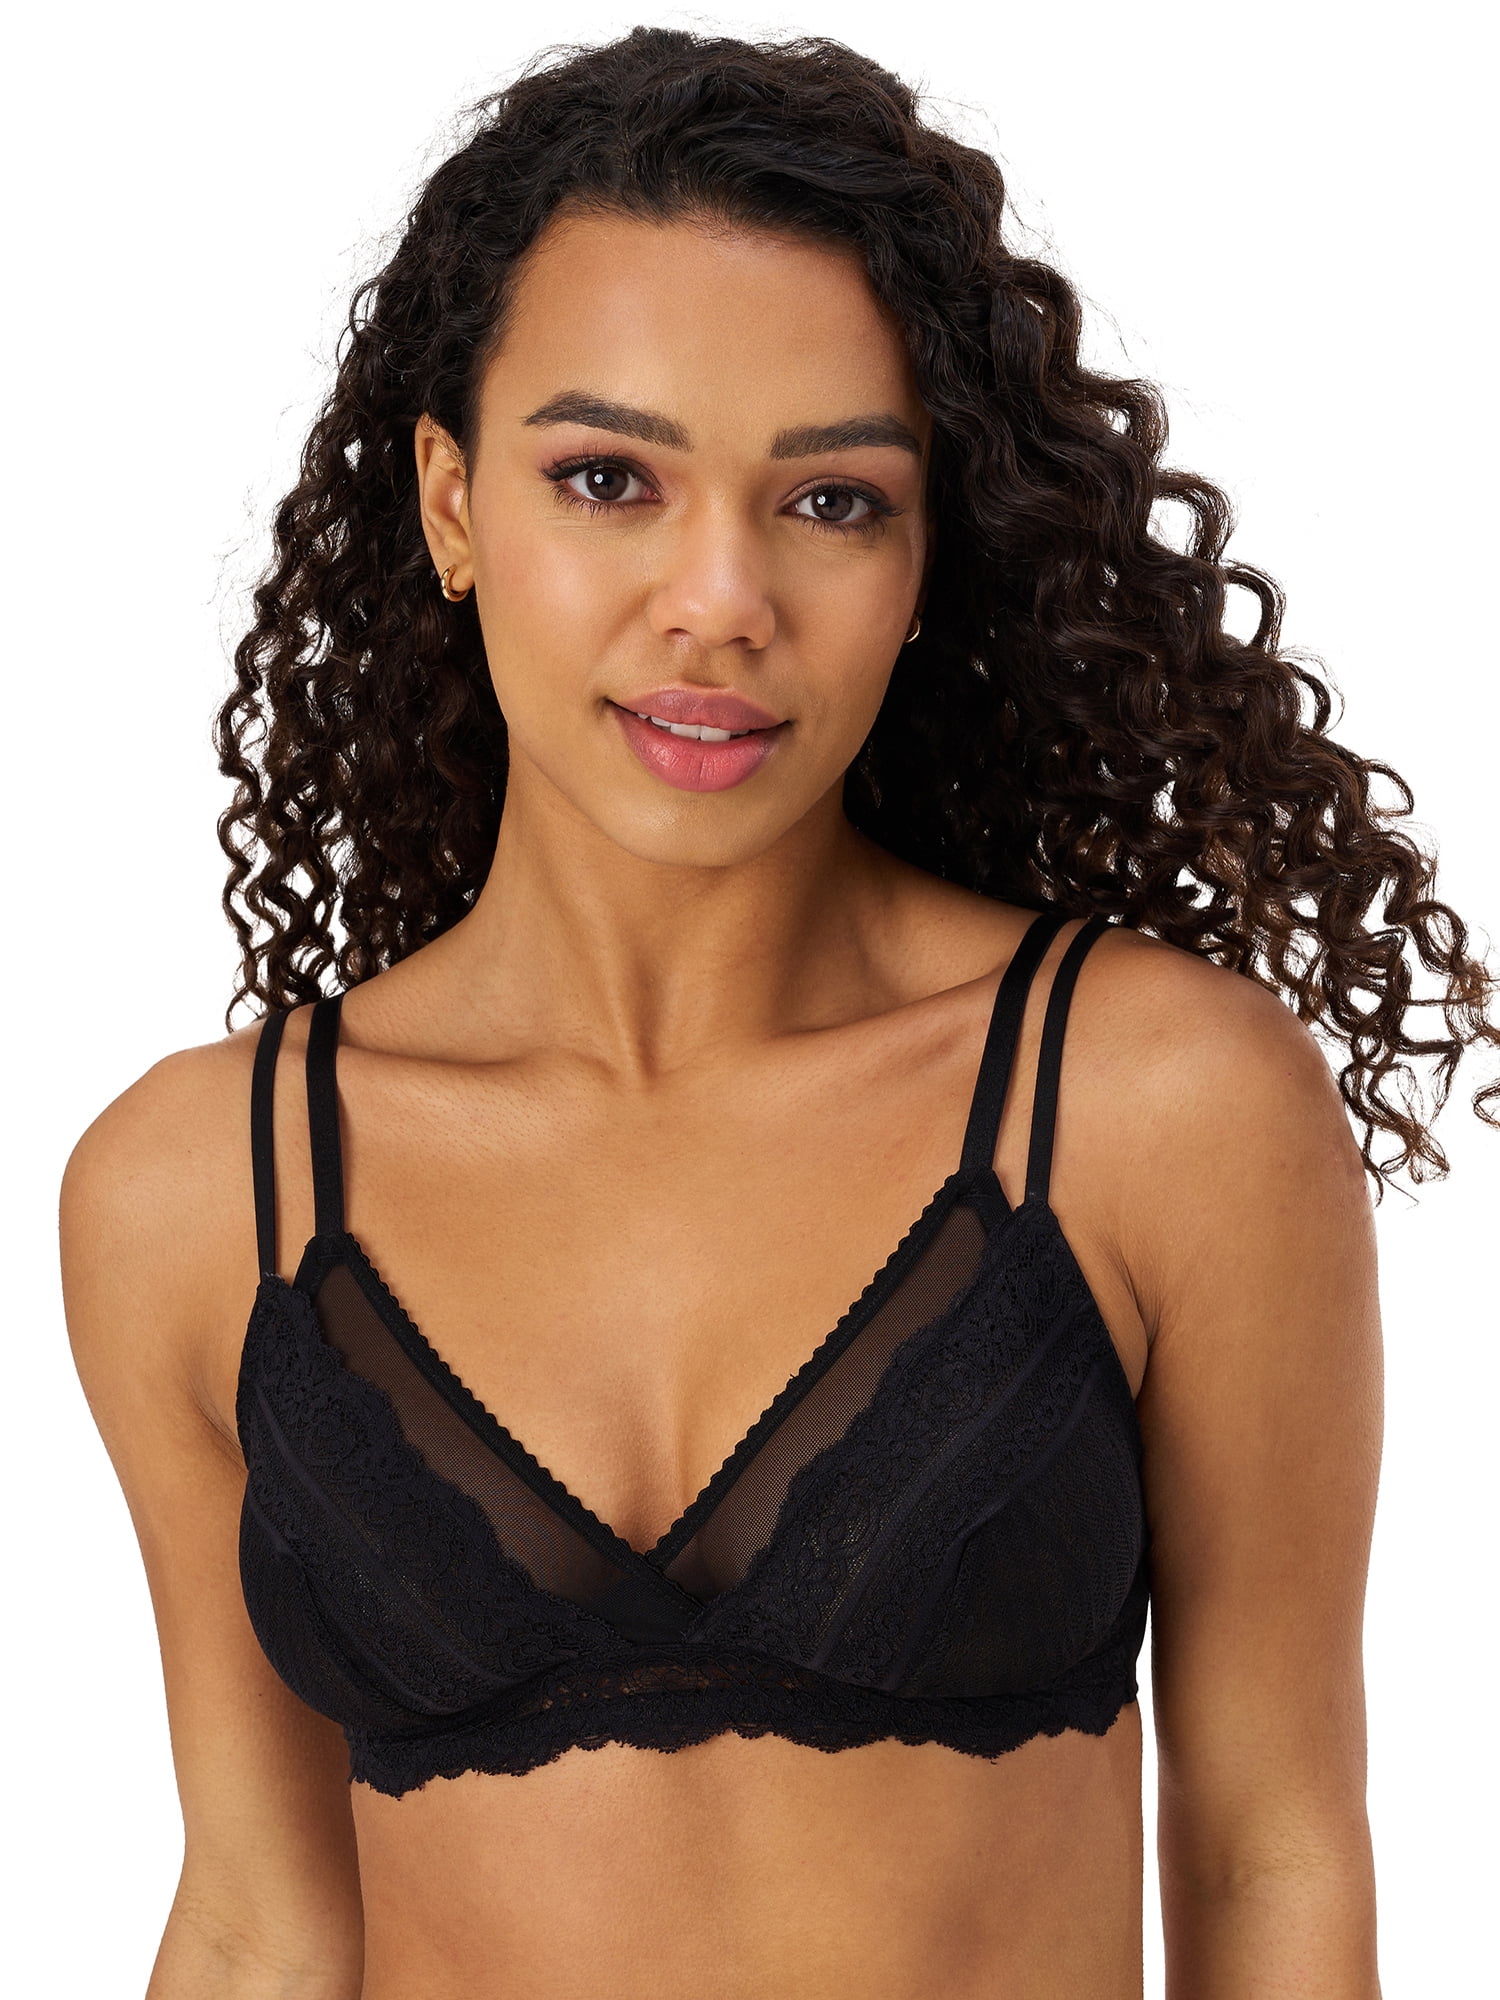 Adored by Adore Me Women's Mandy Wire-Free Unlined Lace/Mesh Triangle  Bralette, Sizes S-3X 